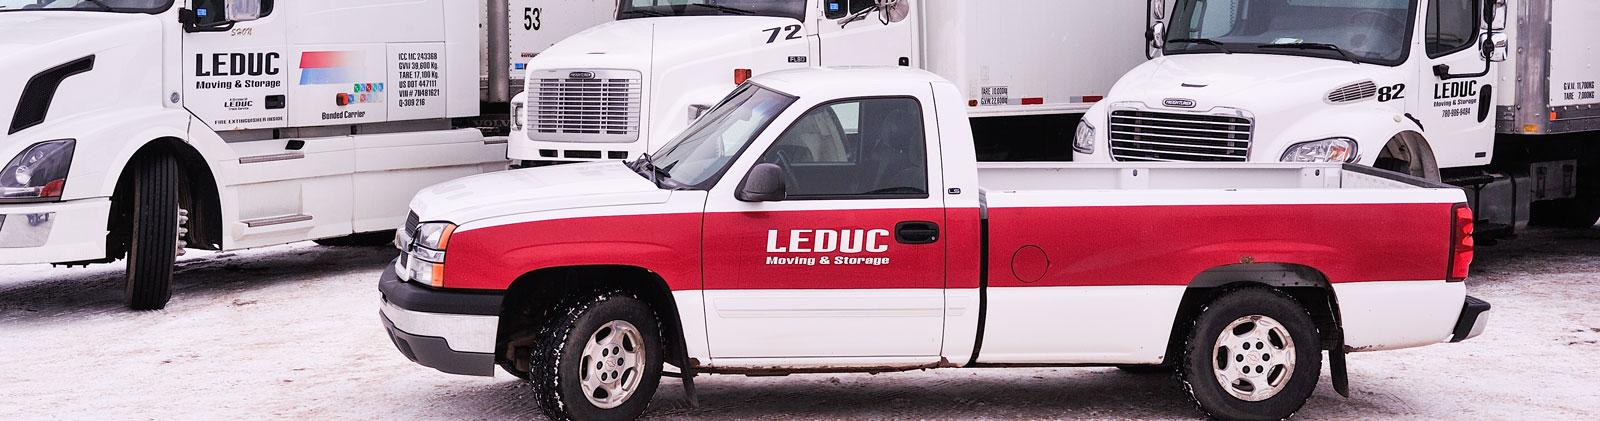 Fast, secure household moving from Leduc Moving and Storage